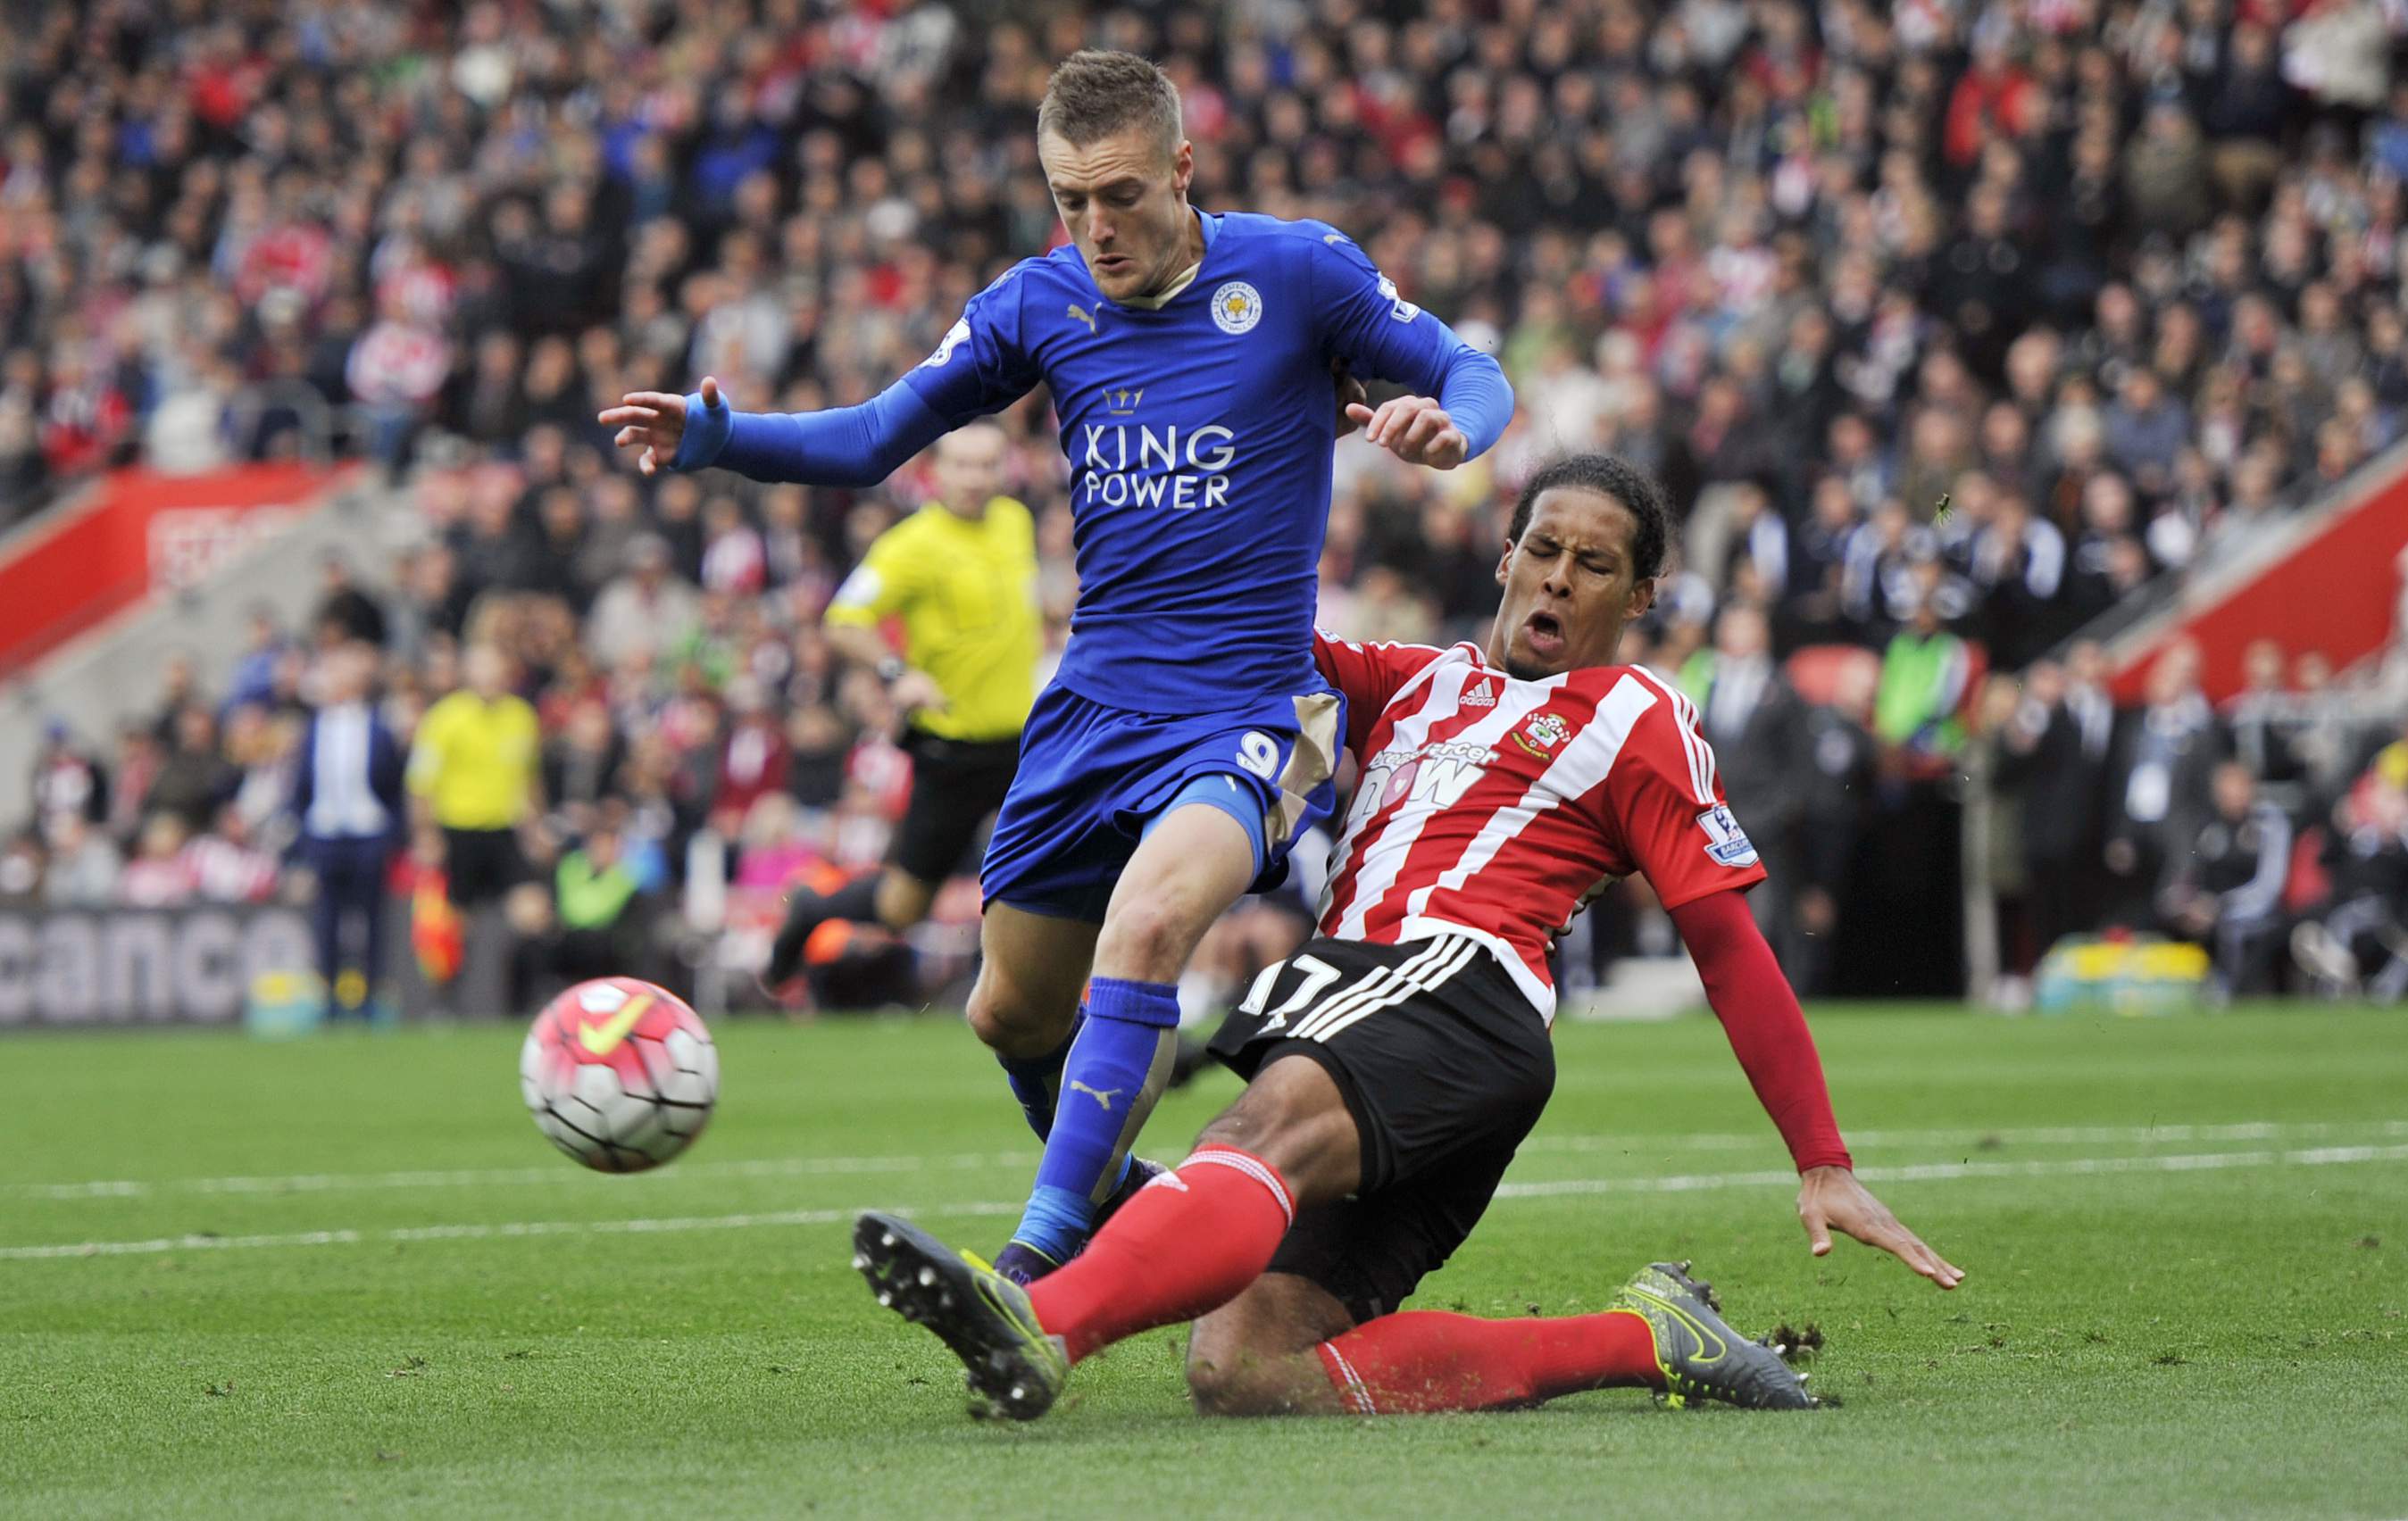 Football - Southampton v Leicester City - Barclays Premier League - St Mary's Stadium - 17/10/15 Southampton's Virgil van Dijk in action with Leicester City's Jamie Vardy Mandatory Credit: Action Images / Adam Holt Livepic EDITORIAL USE ONLY. No use with unauthorized audio, video, data, fixture lists, club/league logos or "live" services. Online in-match use limited to 45 images, no video emulation. No use in betting, games or single club/league/player publications.  Please contact your account representative for further details.